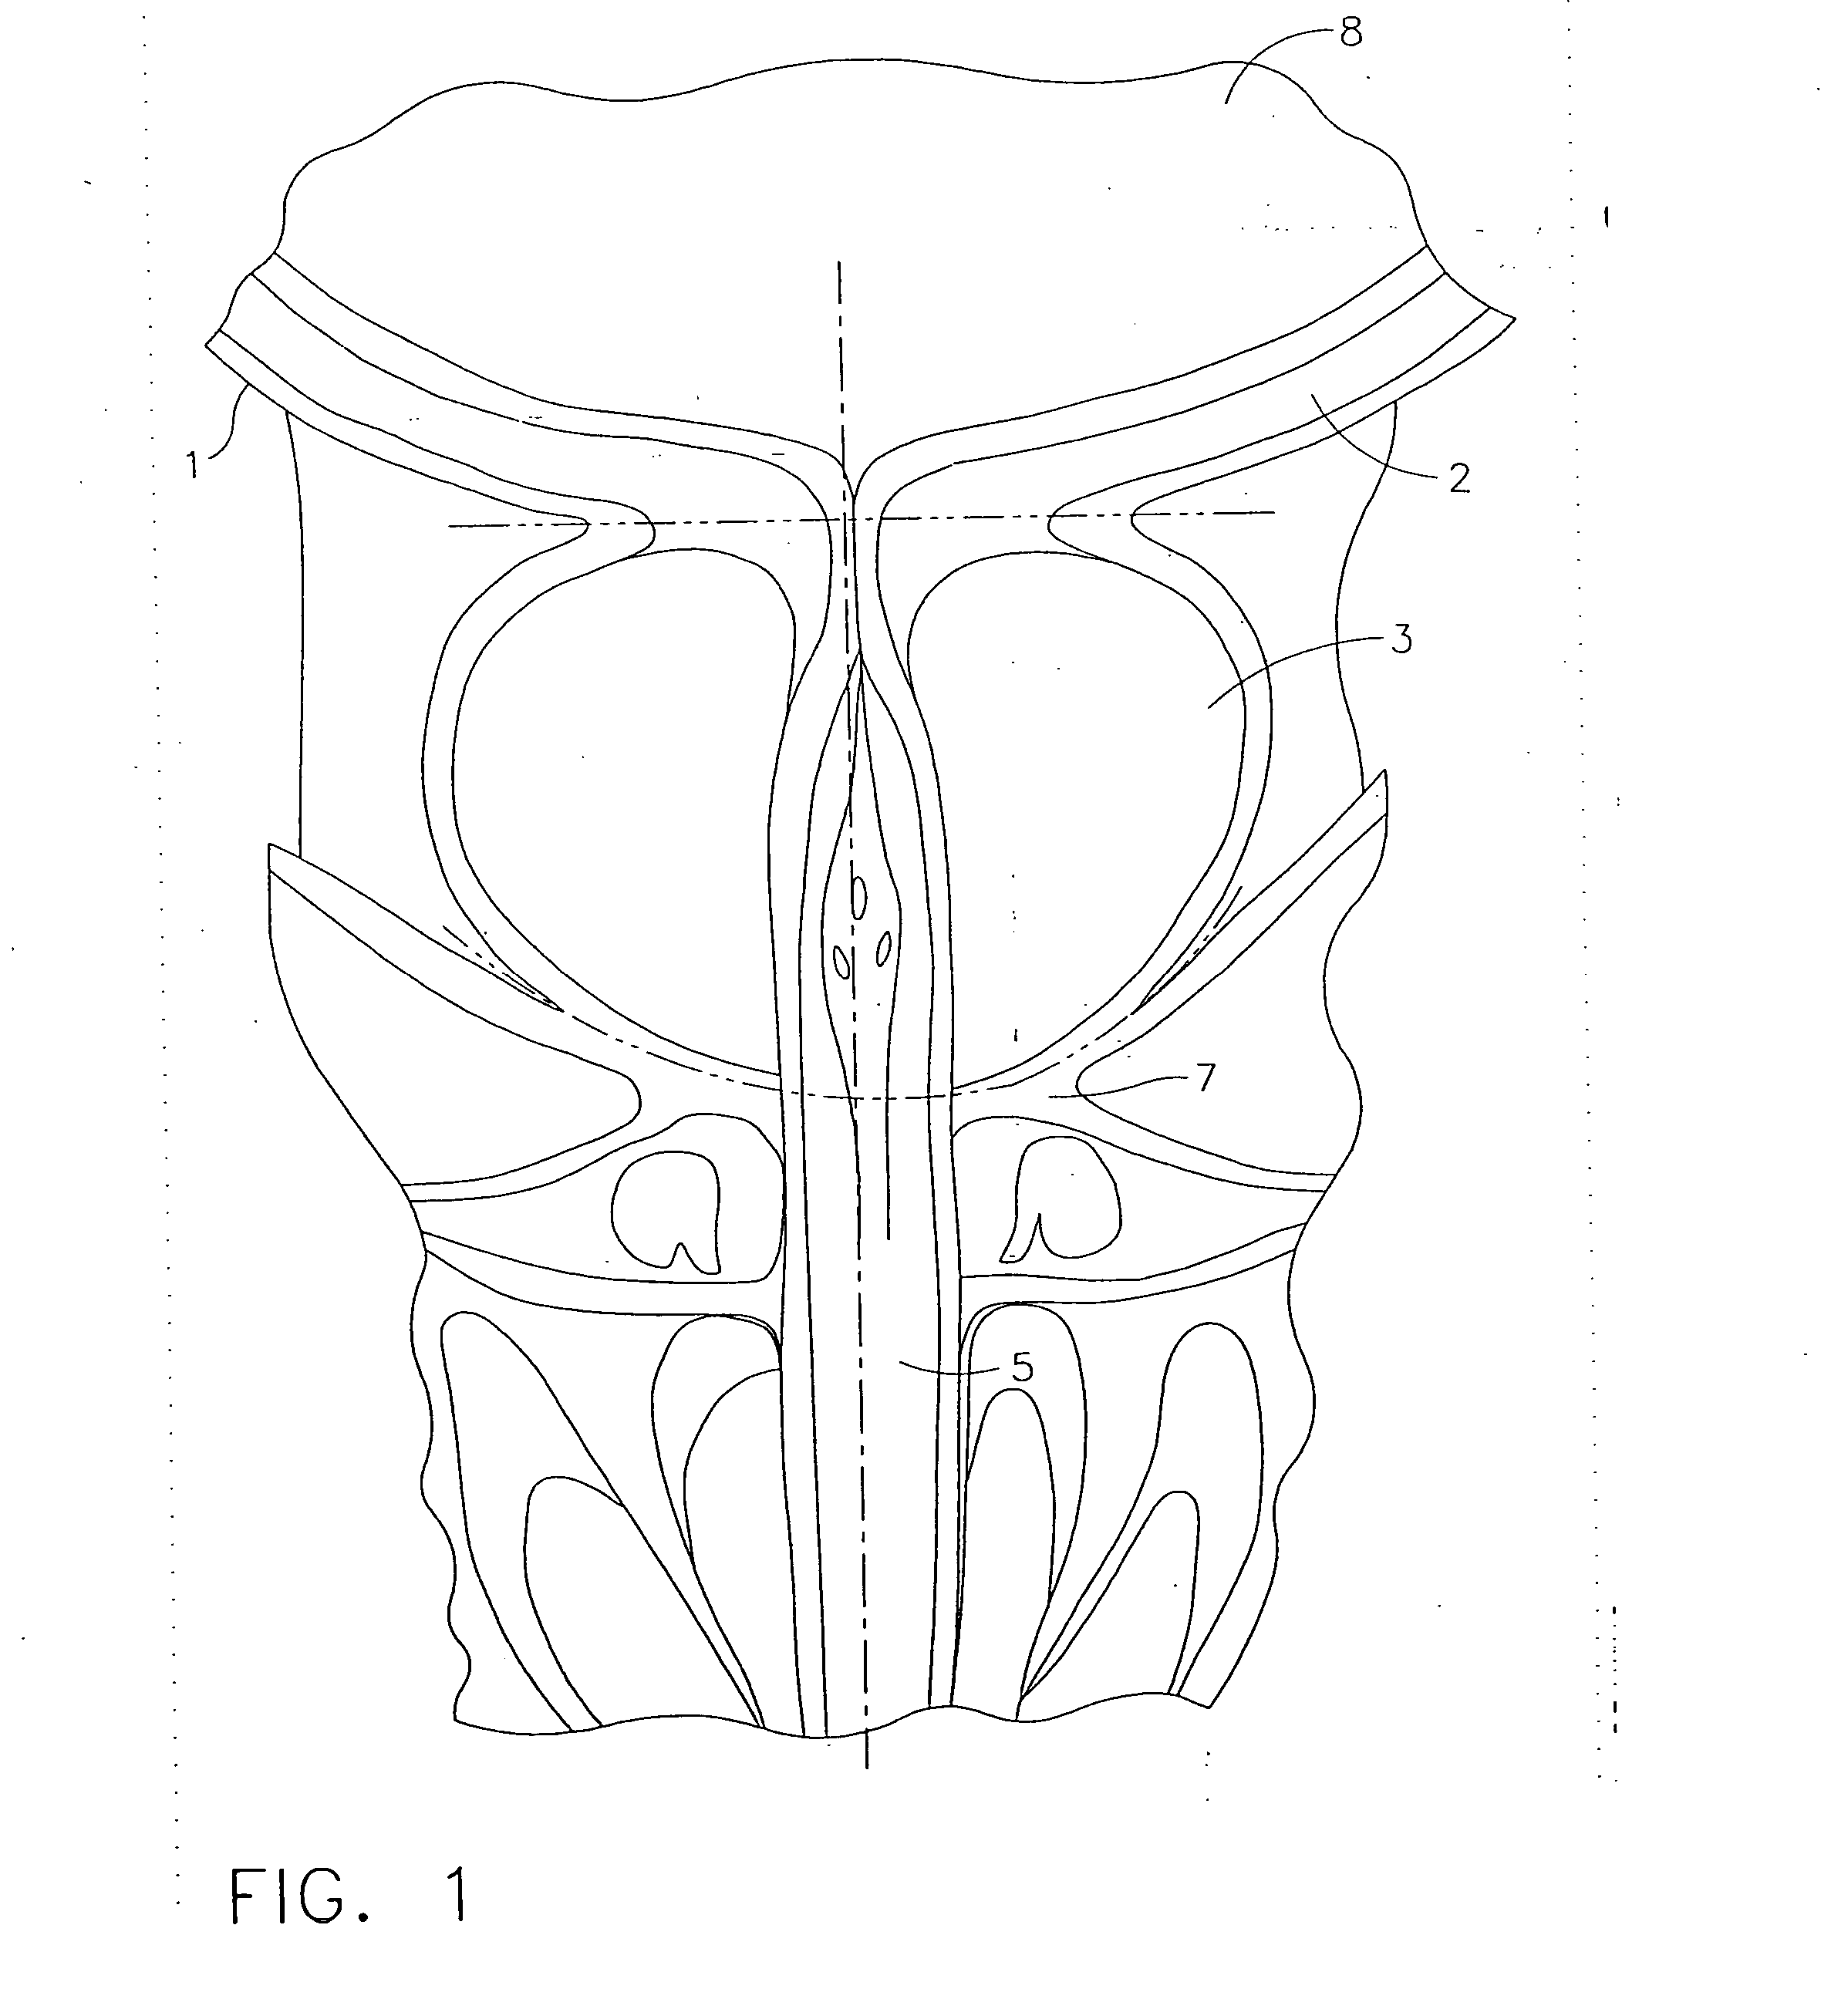 Anchors for use in attachment of bladder tissues to pelvic floor tissues following a prostatectomy